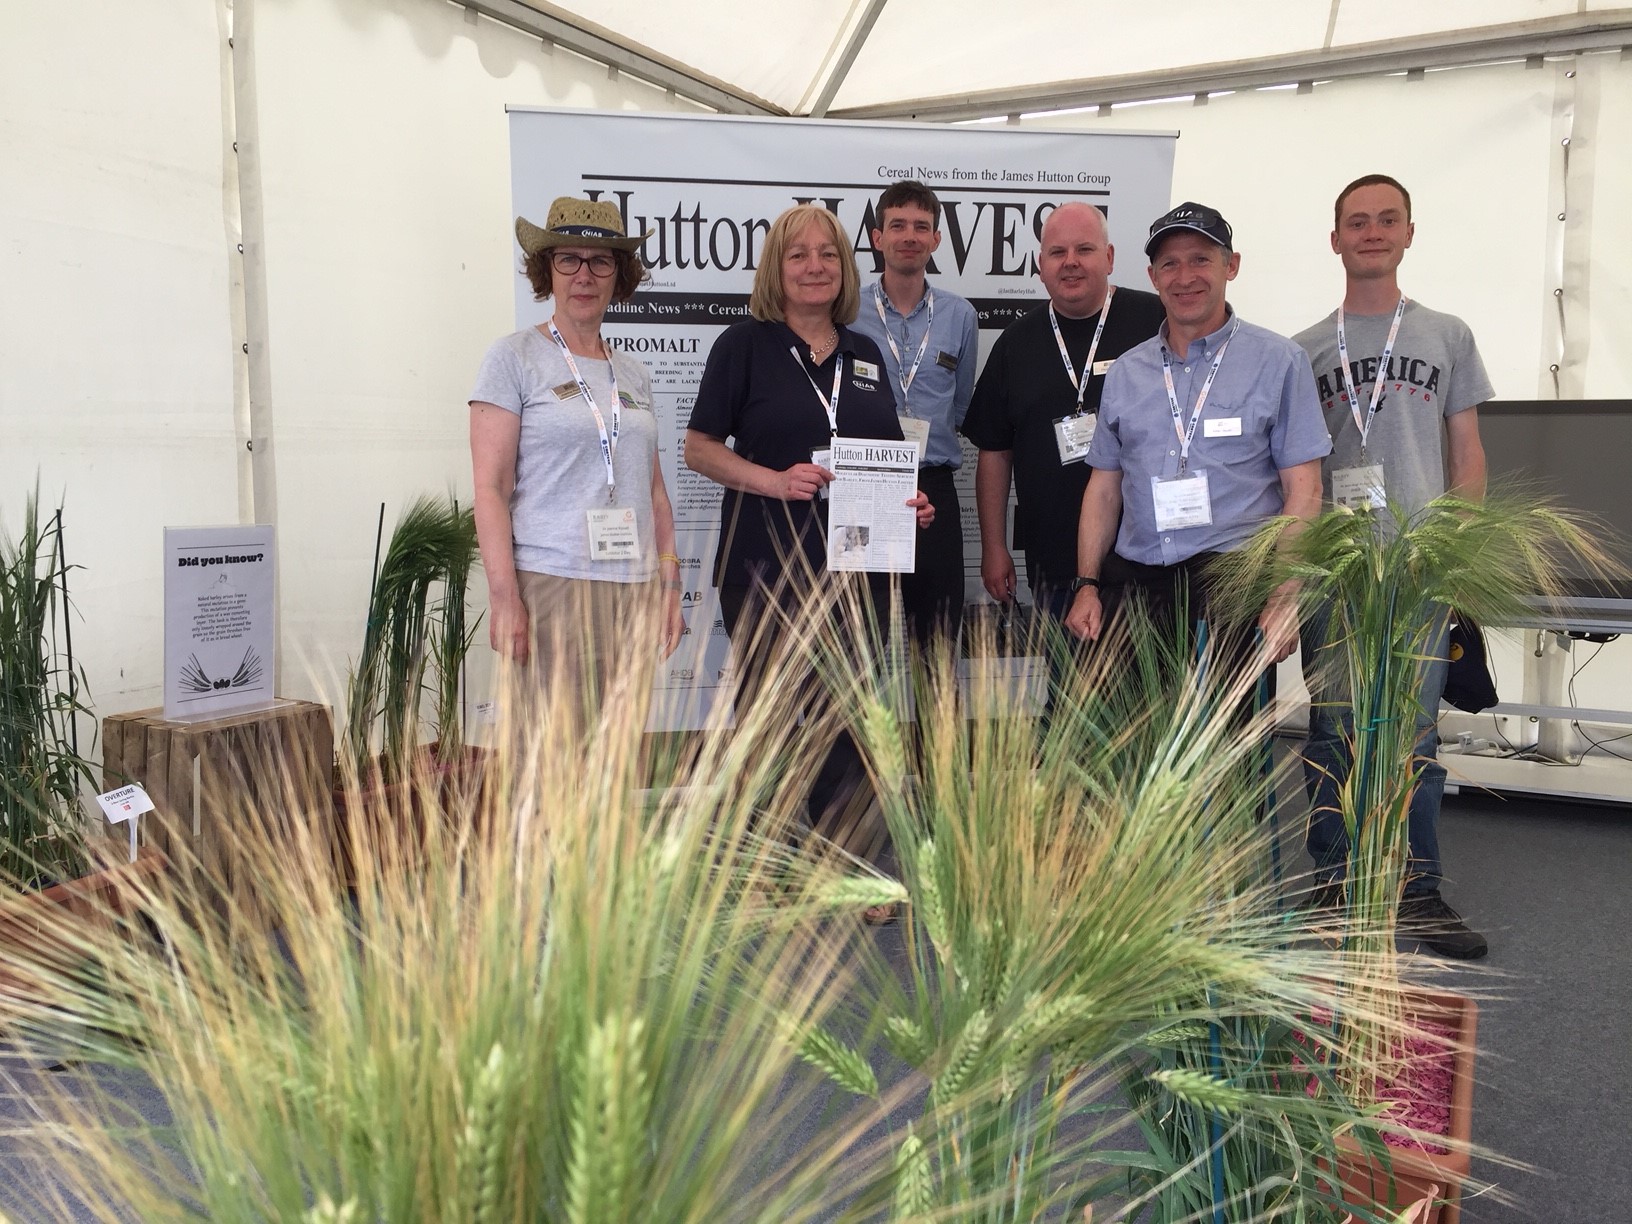 Team at Cereals 2018